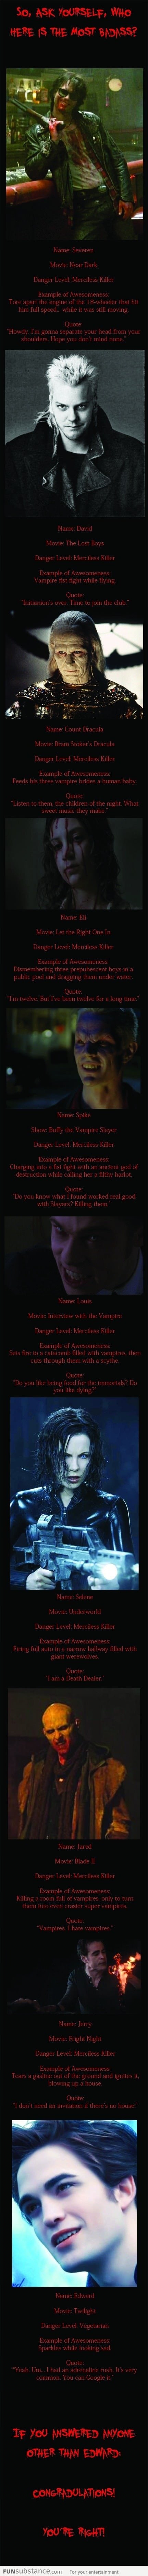 So Who Is Your Favorite Vampire?